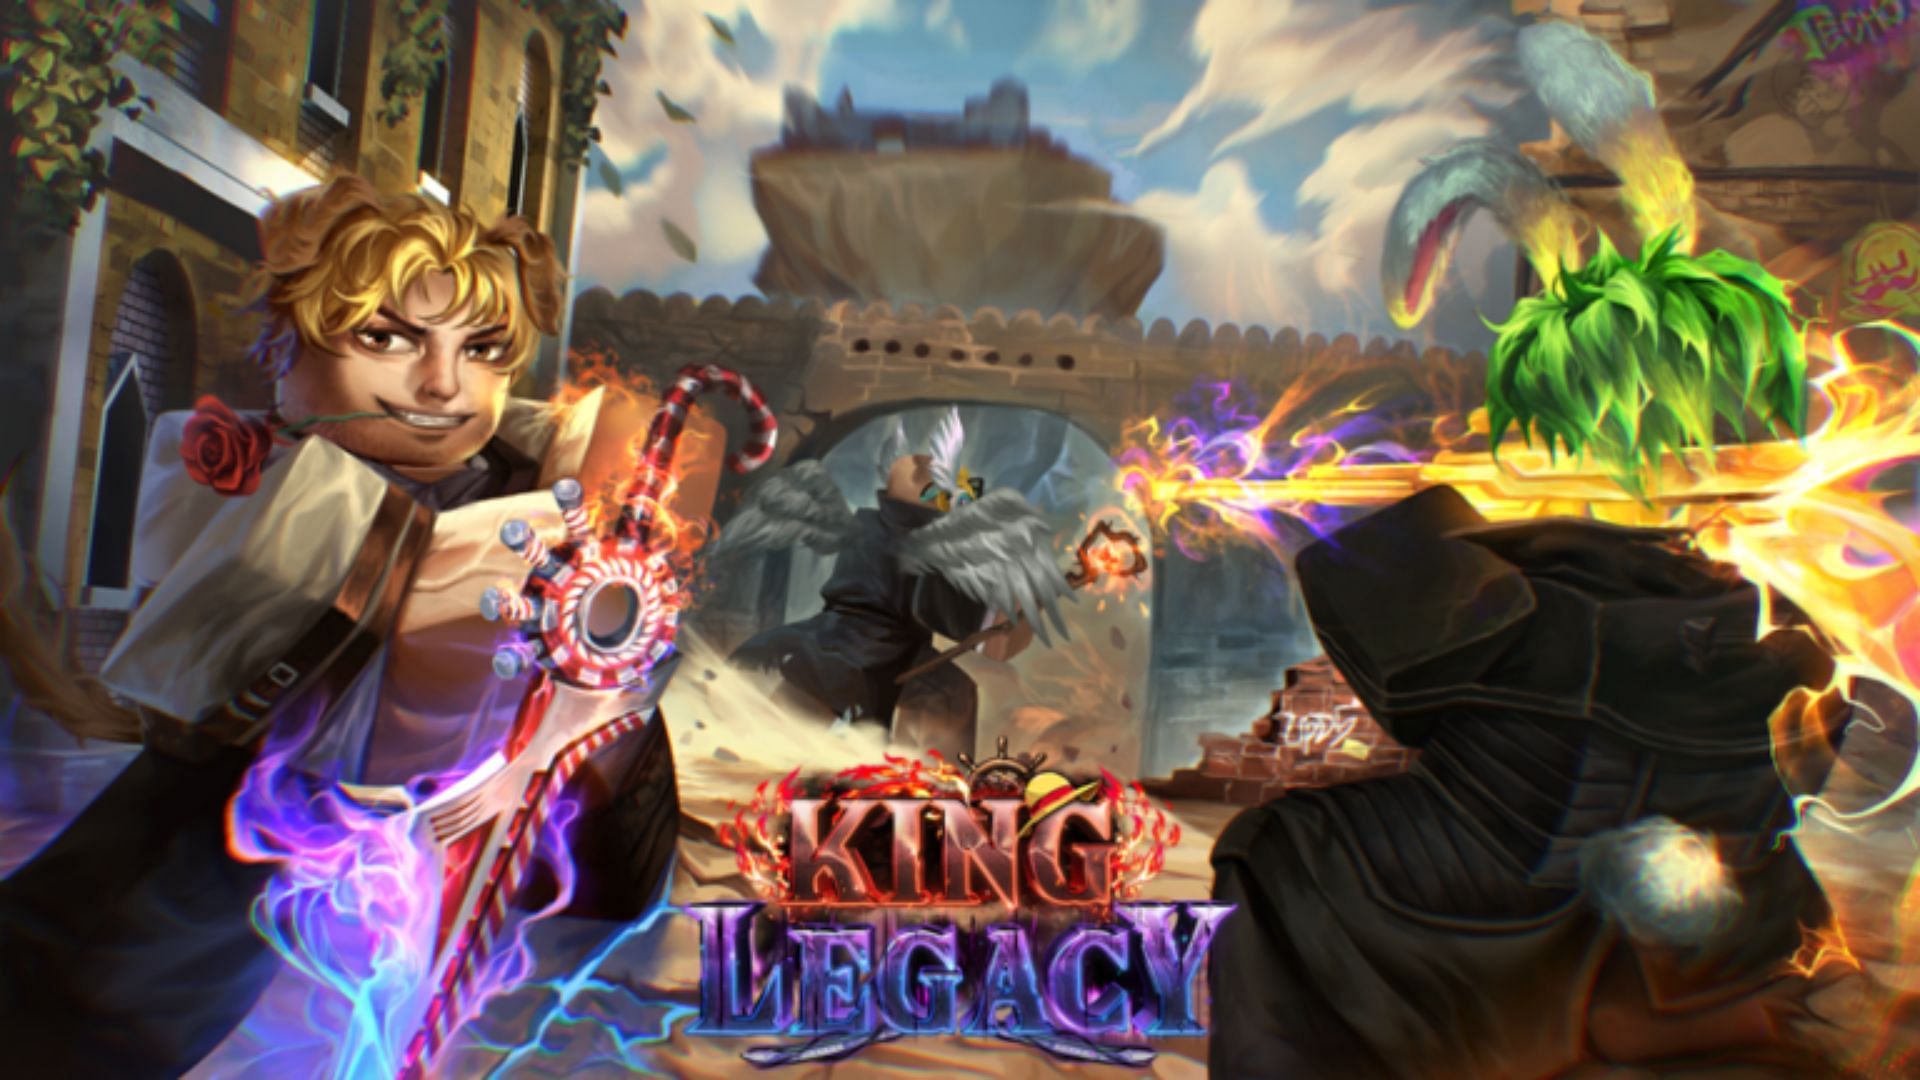 Featured King Legacy poster (Image via Roblox)